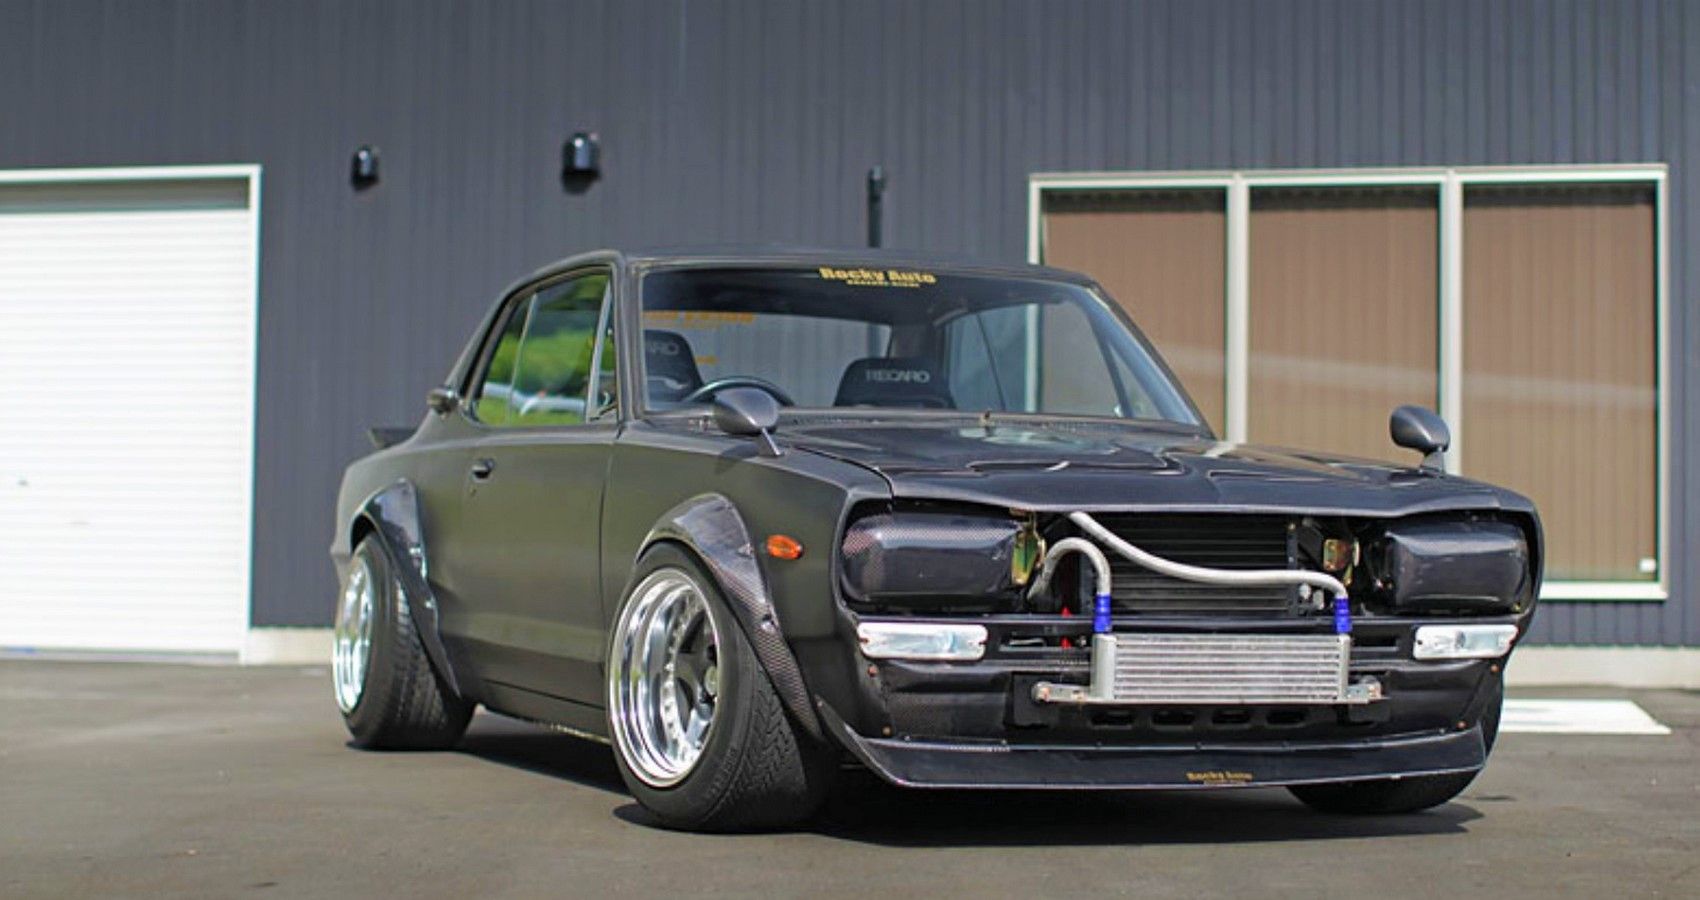 10 Reasons Why The Hakosuka Nissan Skyline Is The Coolest JDM Classic Of All Time